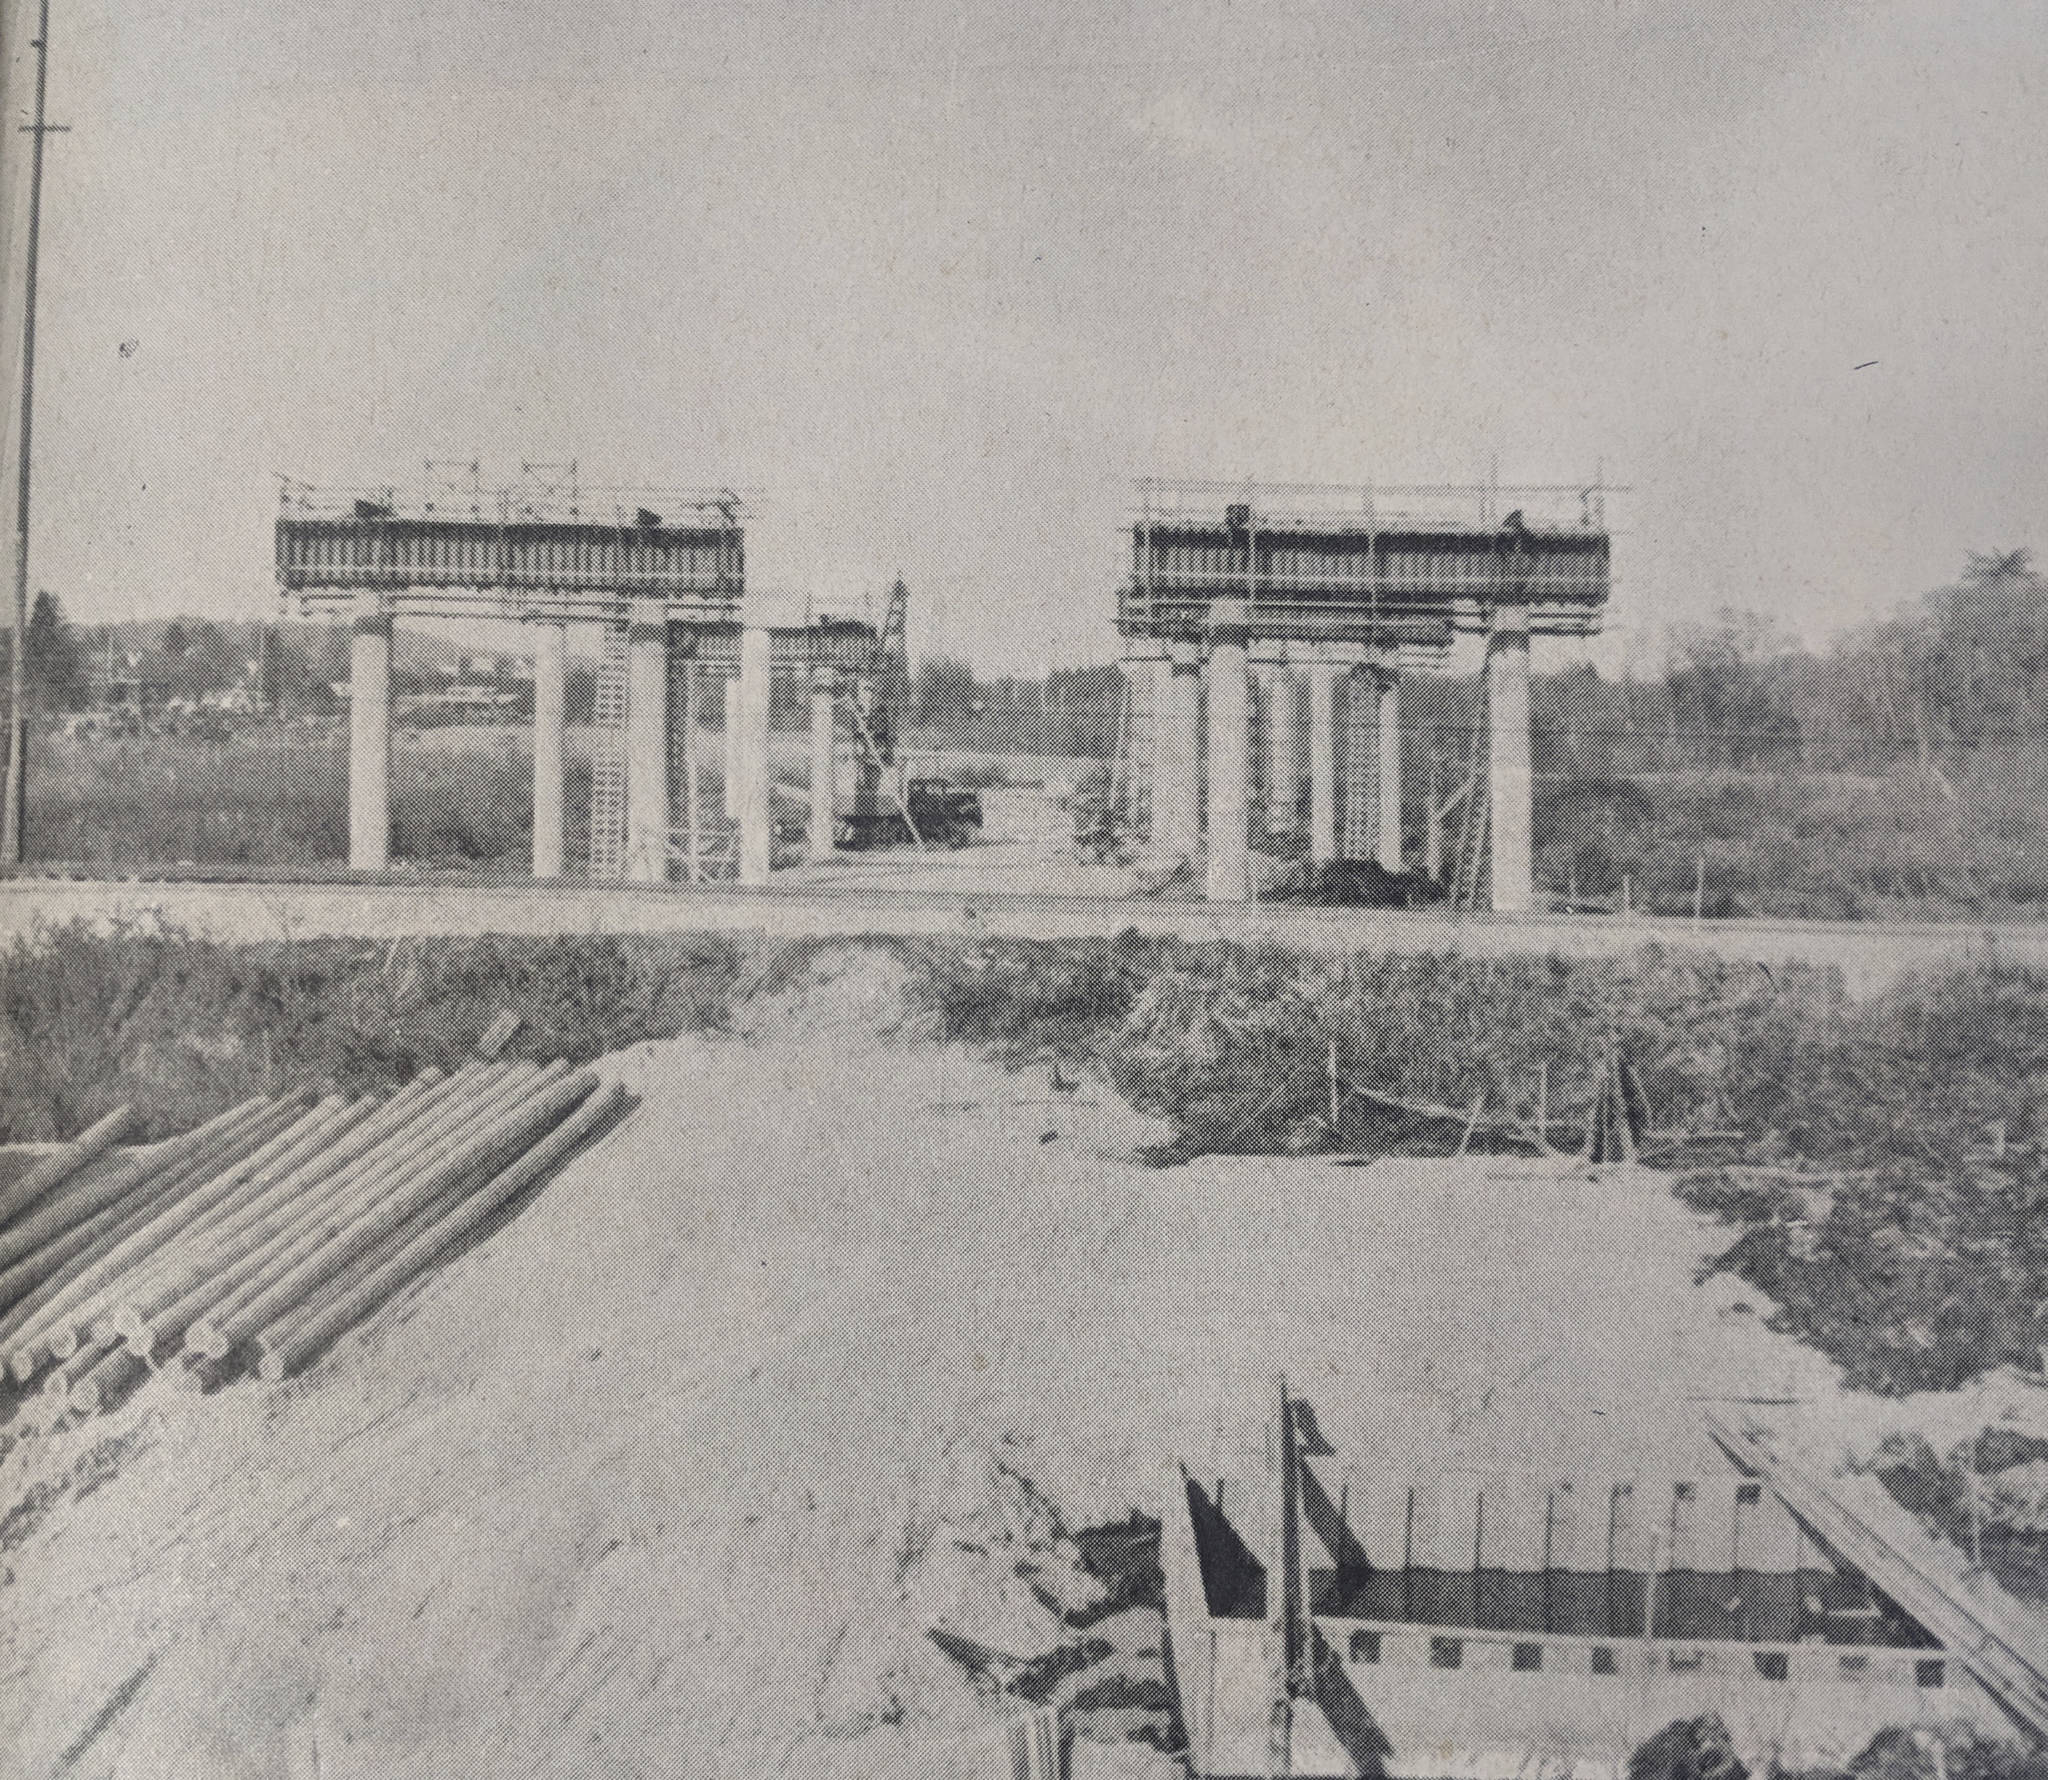 From the May 2, 1968, issue of The Vidette: “Work is progressing rapidly on the overpass and freeway south of Montesano. Two lanes of traffic are scheduled to be opened to travel by Labor Day. The overpass will be 23.5 feet above the surface of Main Street. The new opening date of the freeway will be approximately six months earlier than originally planned.”